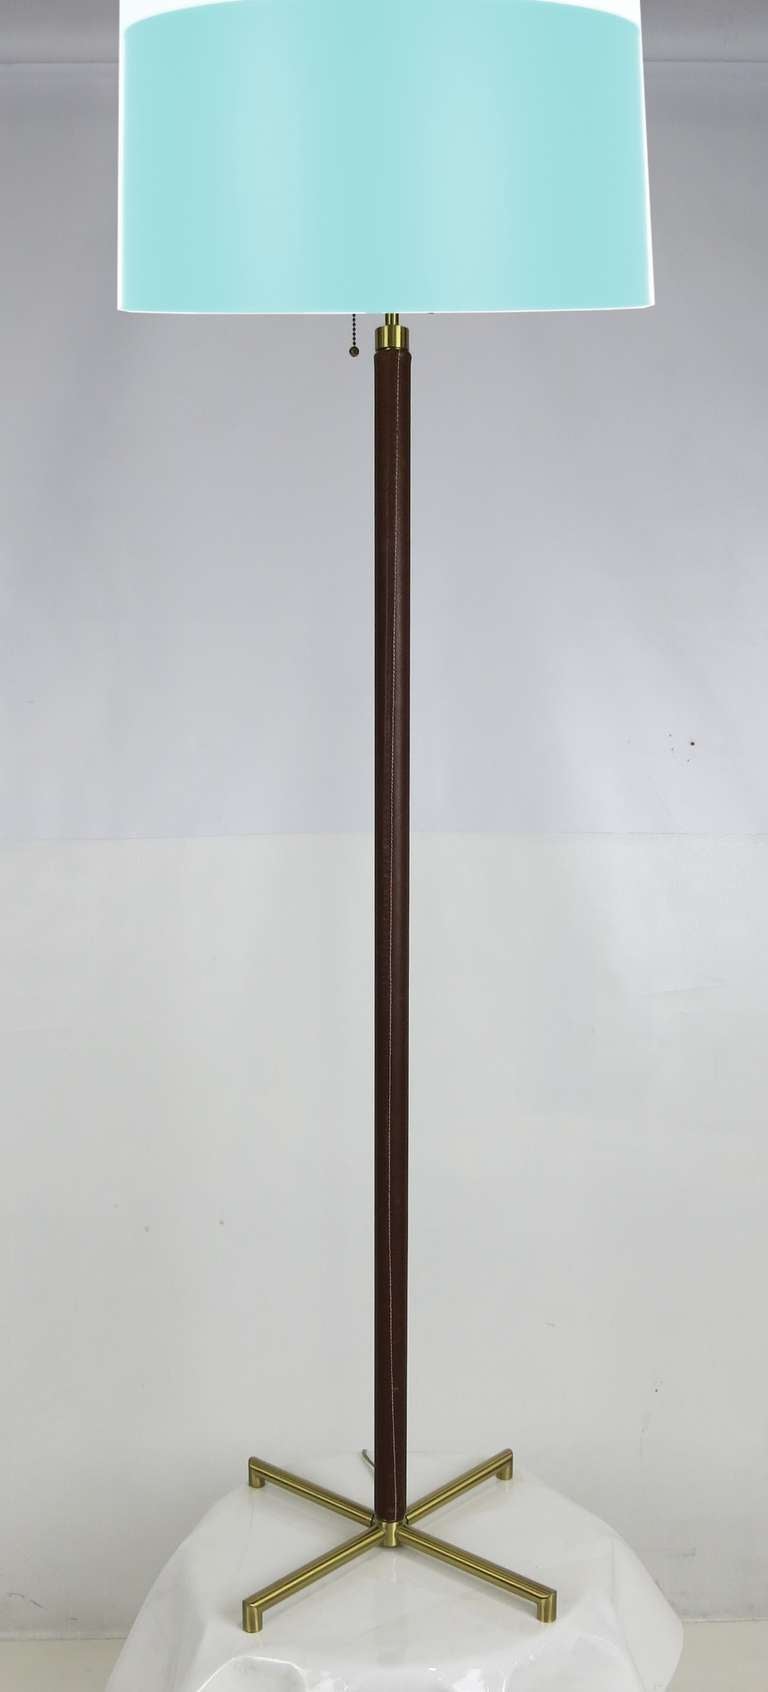 Handsome solid brushed brass floor lamp with stitched leather wrapped neck by Shelton-Mindel for Nessen Lighting.